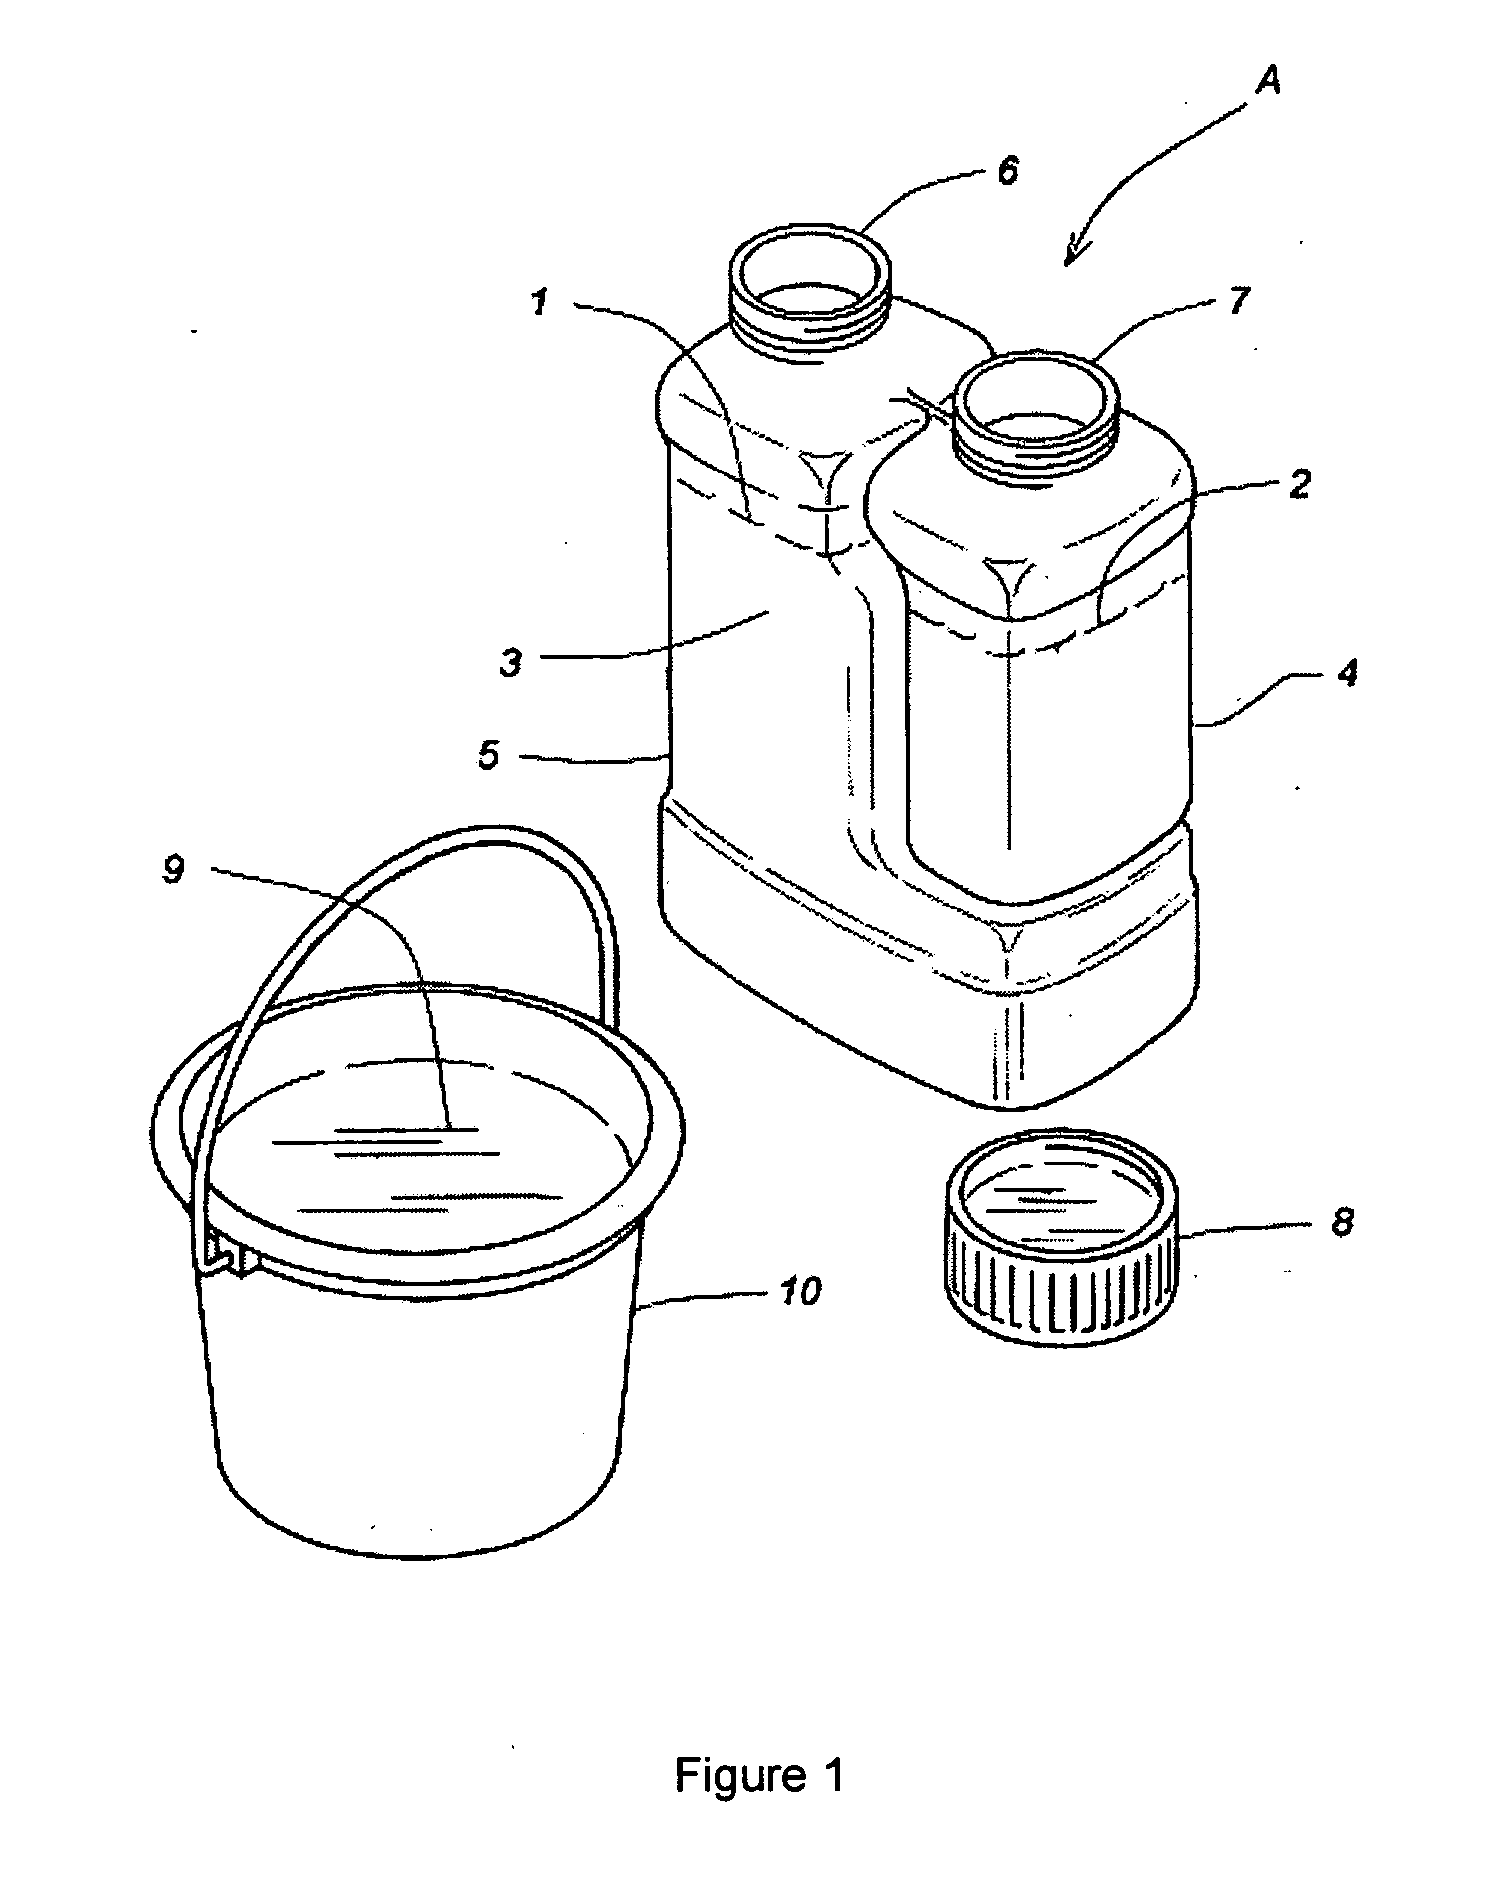 Two-part liquid cleaner system